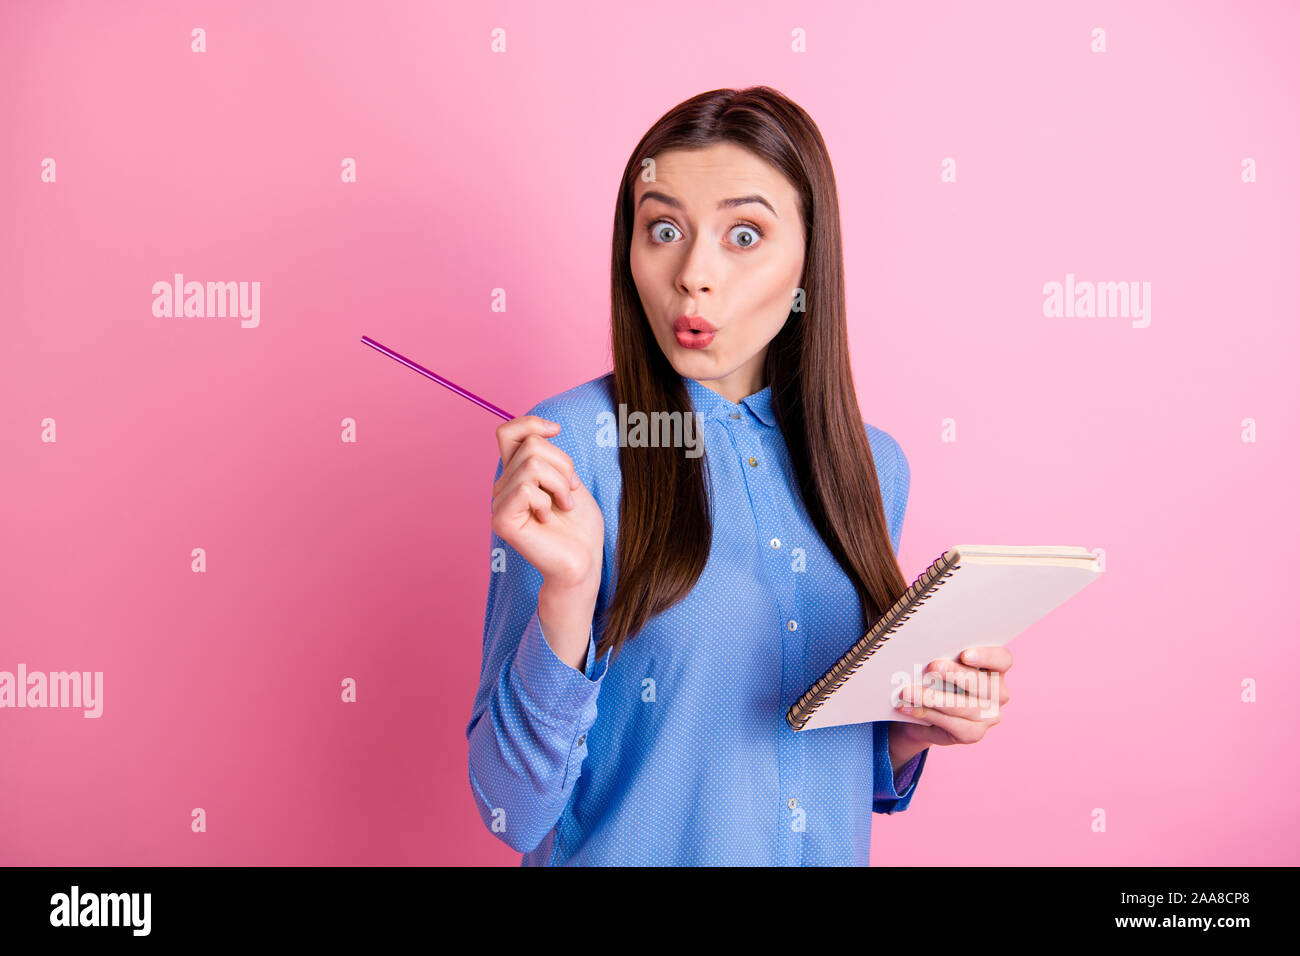 Photo of creative cute charming professional lawyer having made up her mind about solving some situation isolated over pink pastel color background Stock Photo